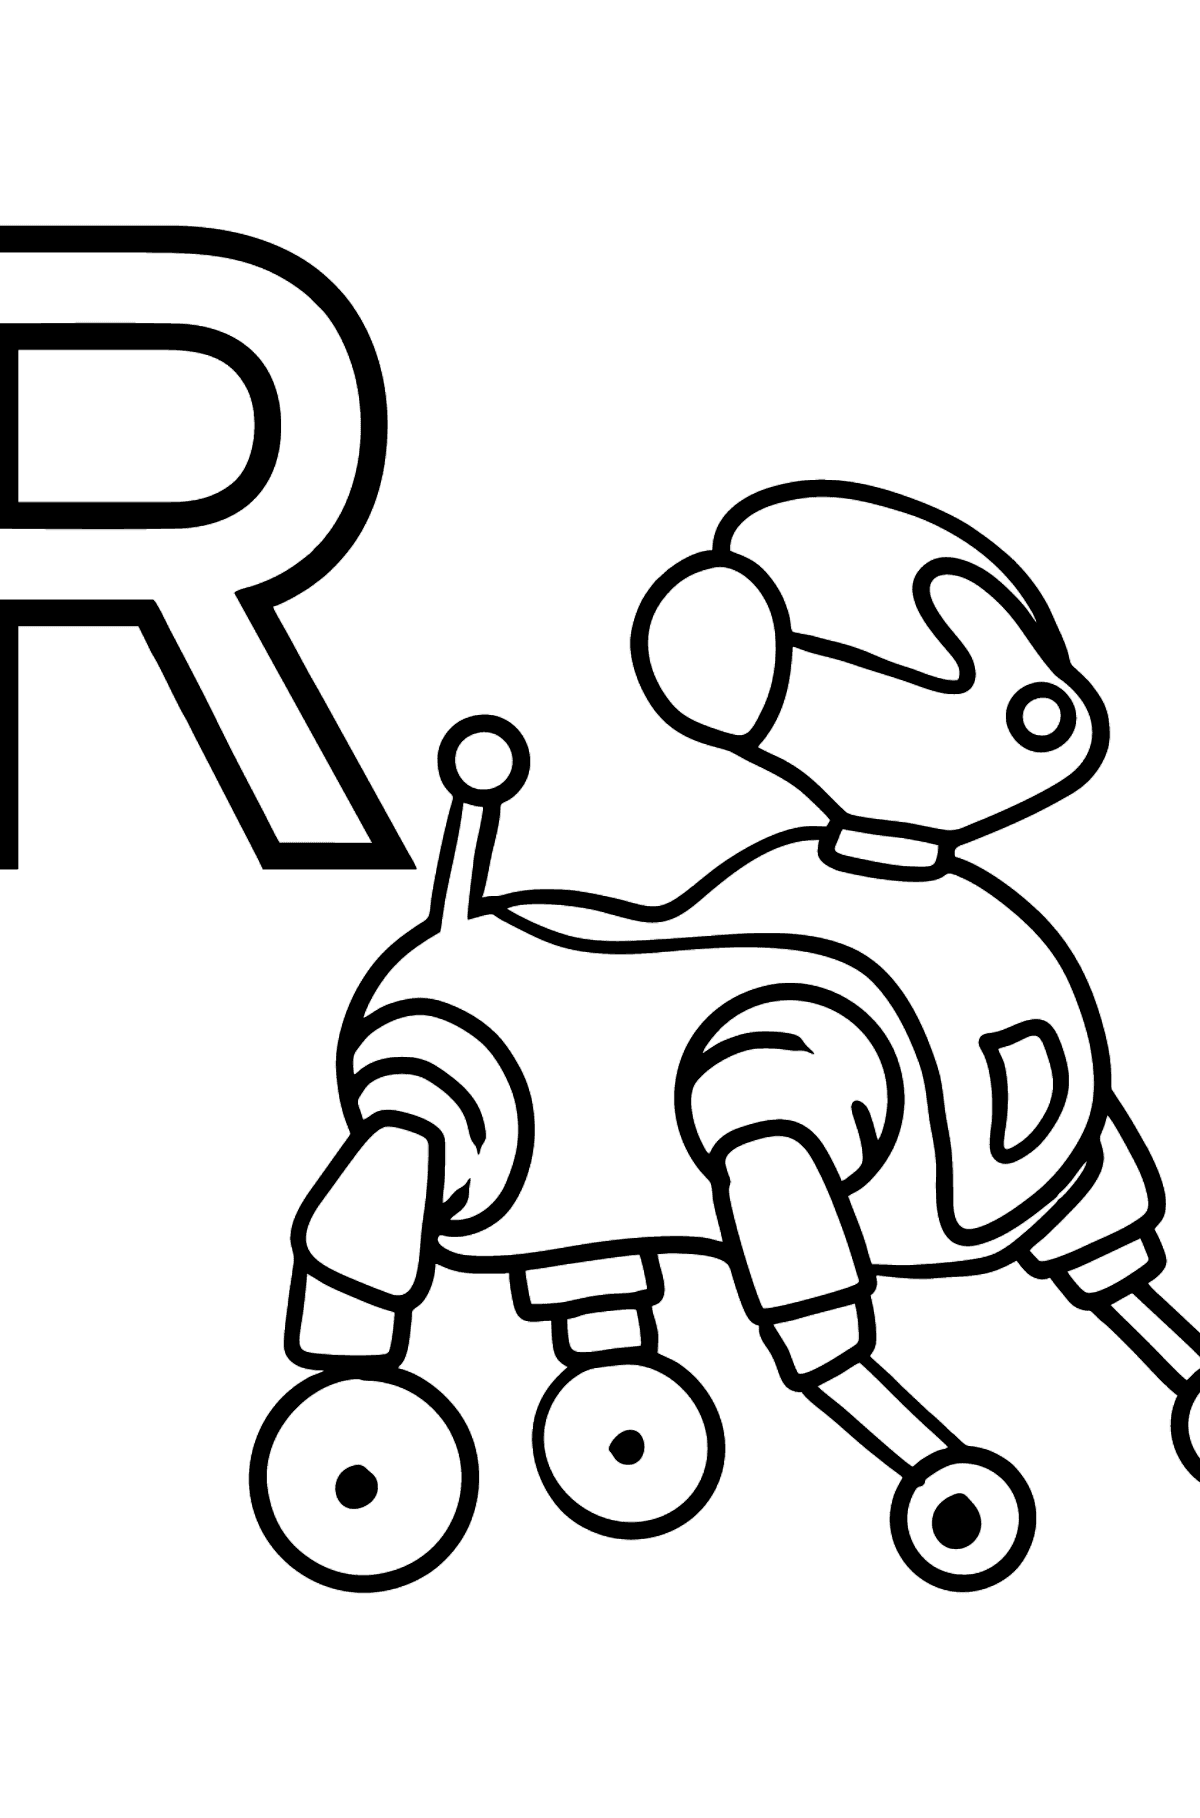 French Letter R coloring pages - ROBOT - Coloring Pages for Kids